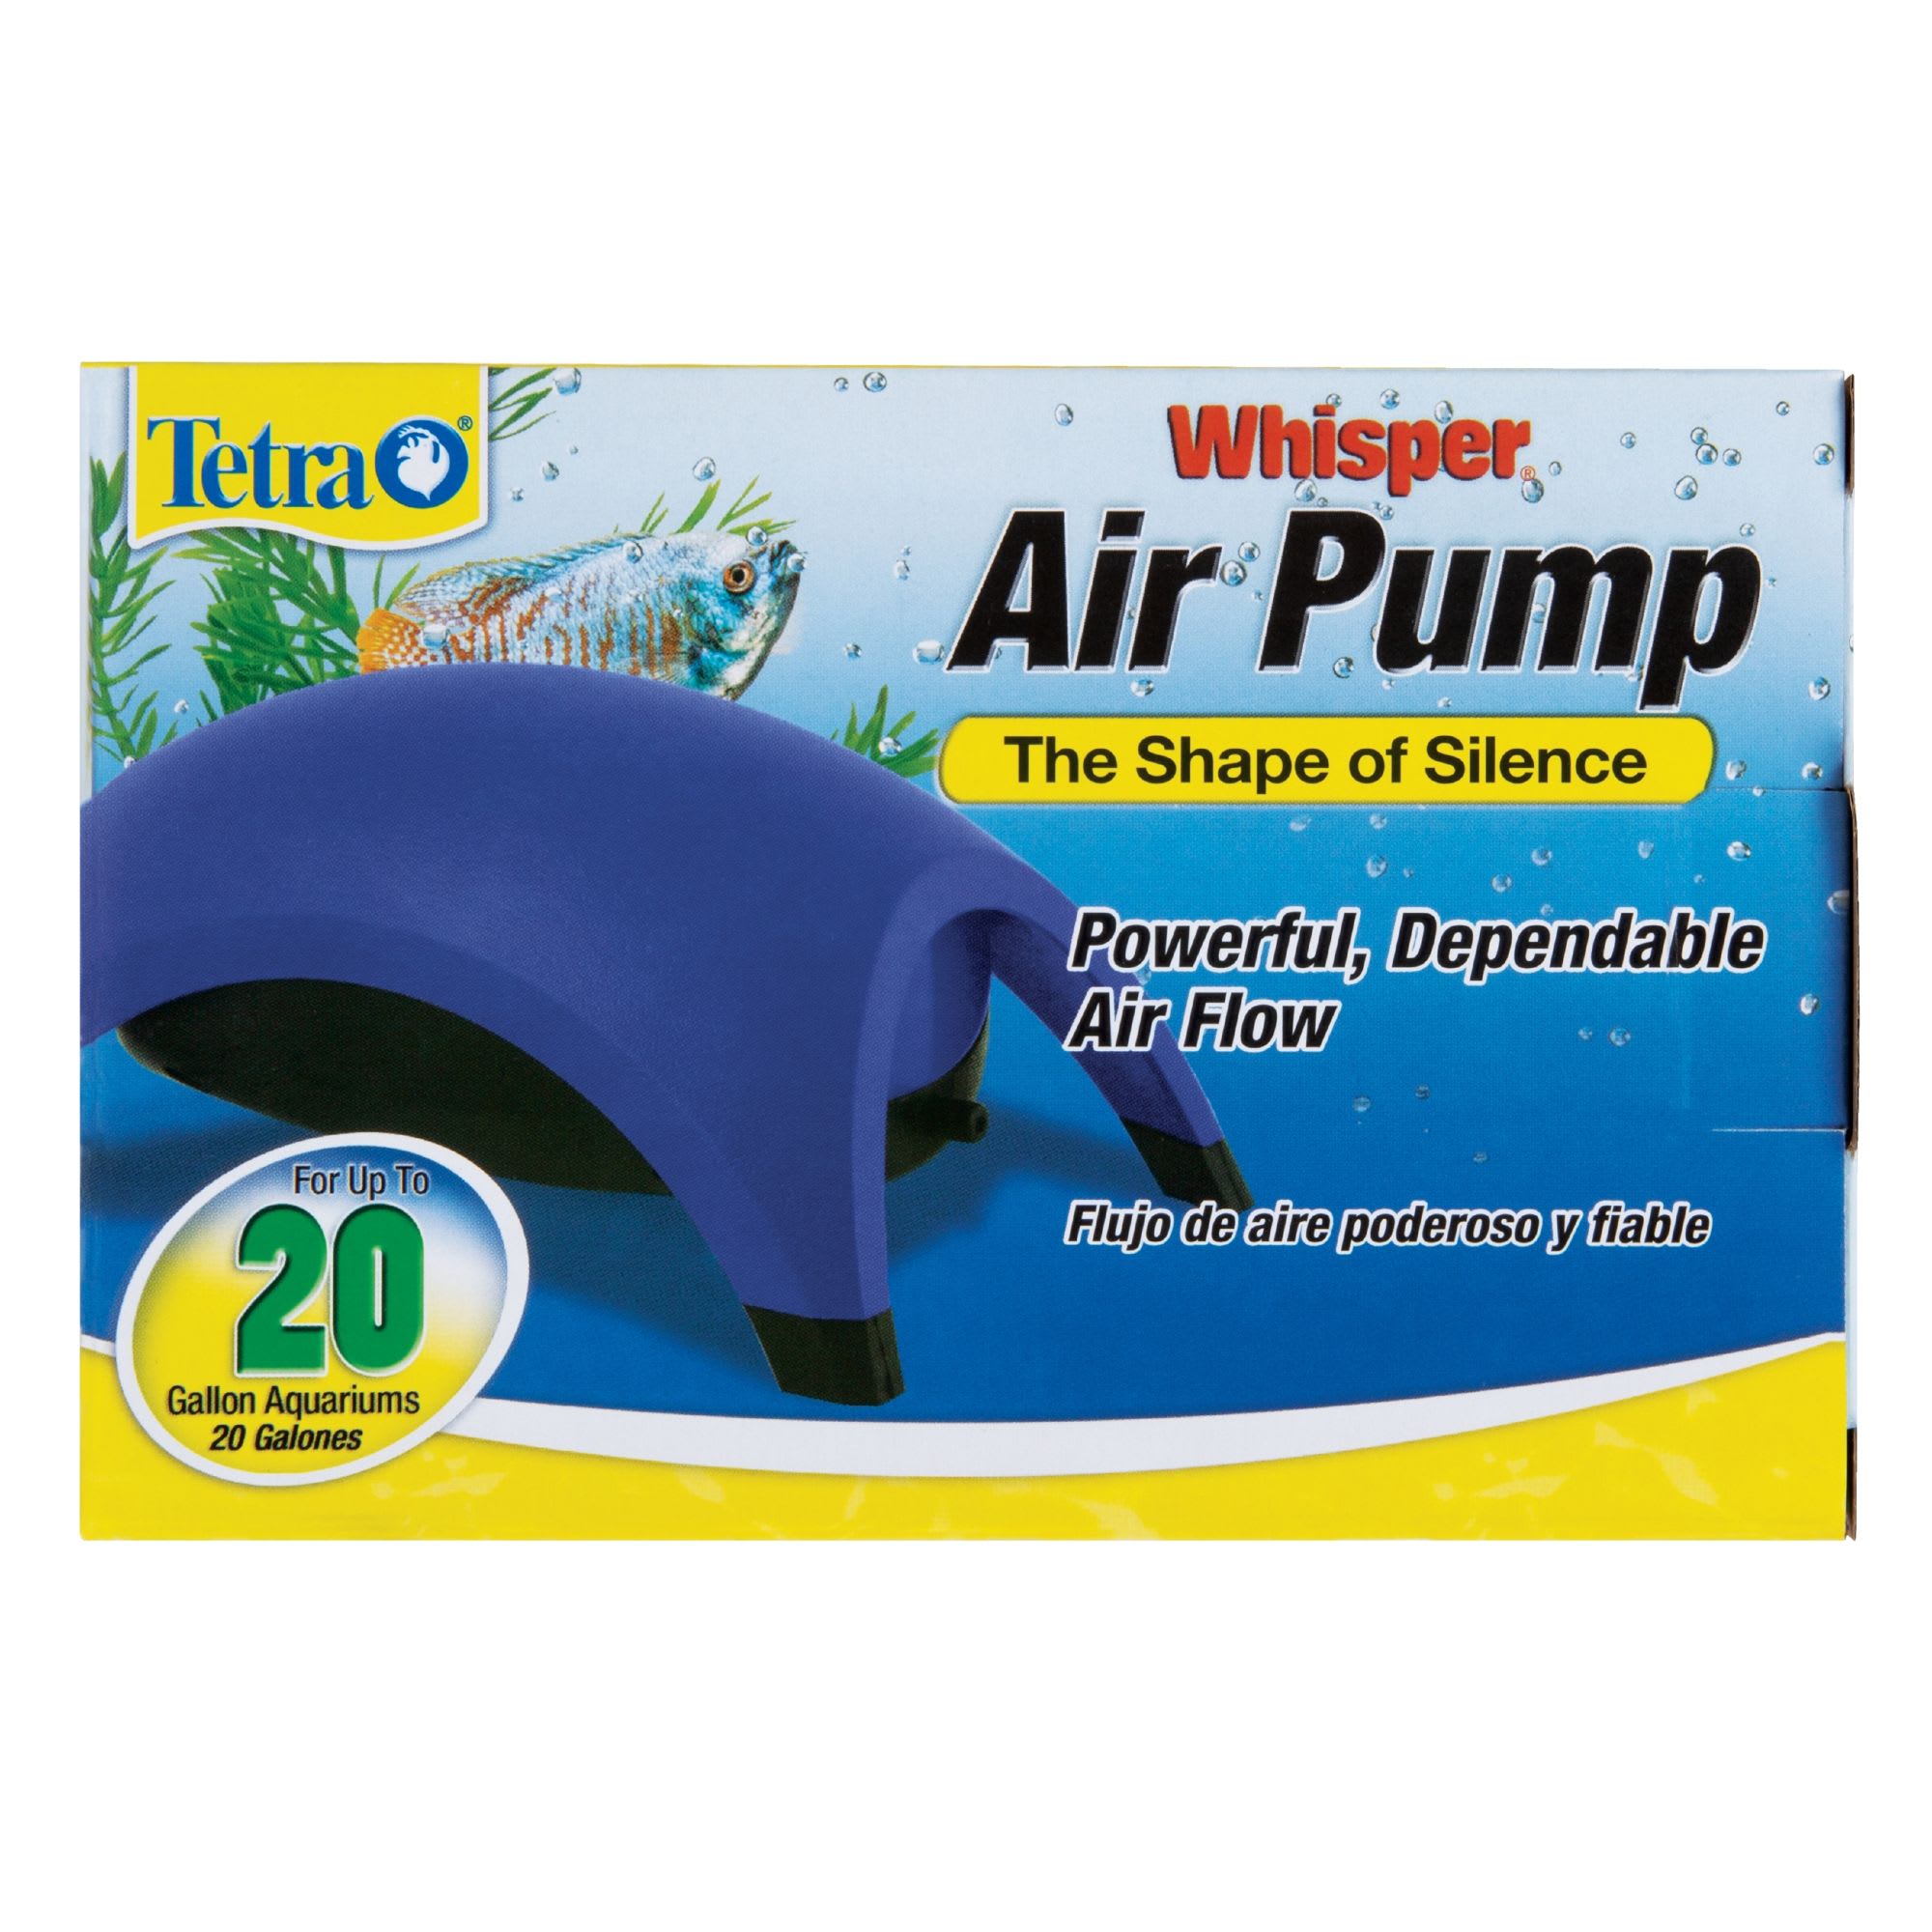 Aquarium Air Pump: How It Works and Why You Might Need One